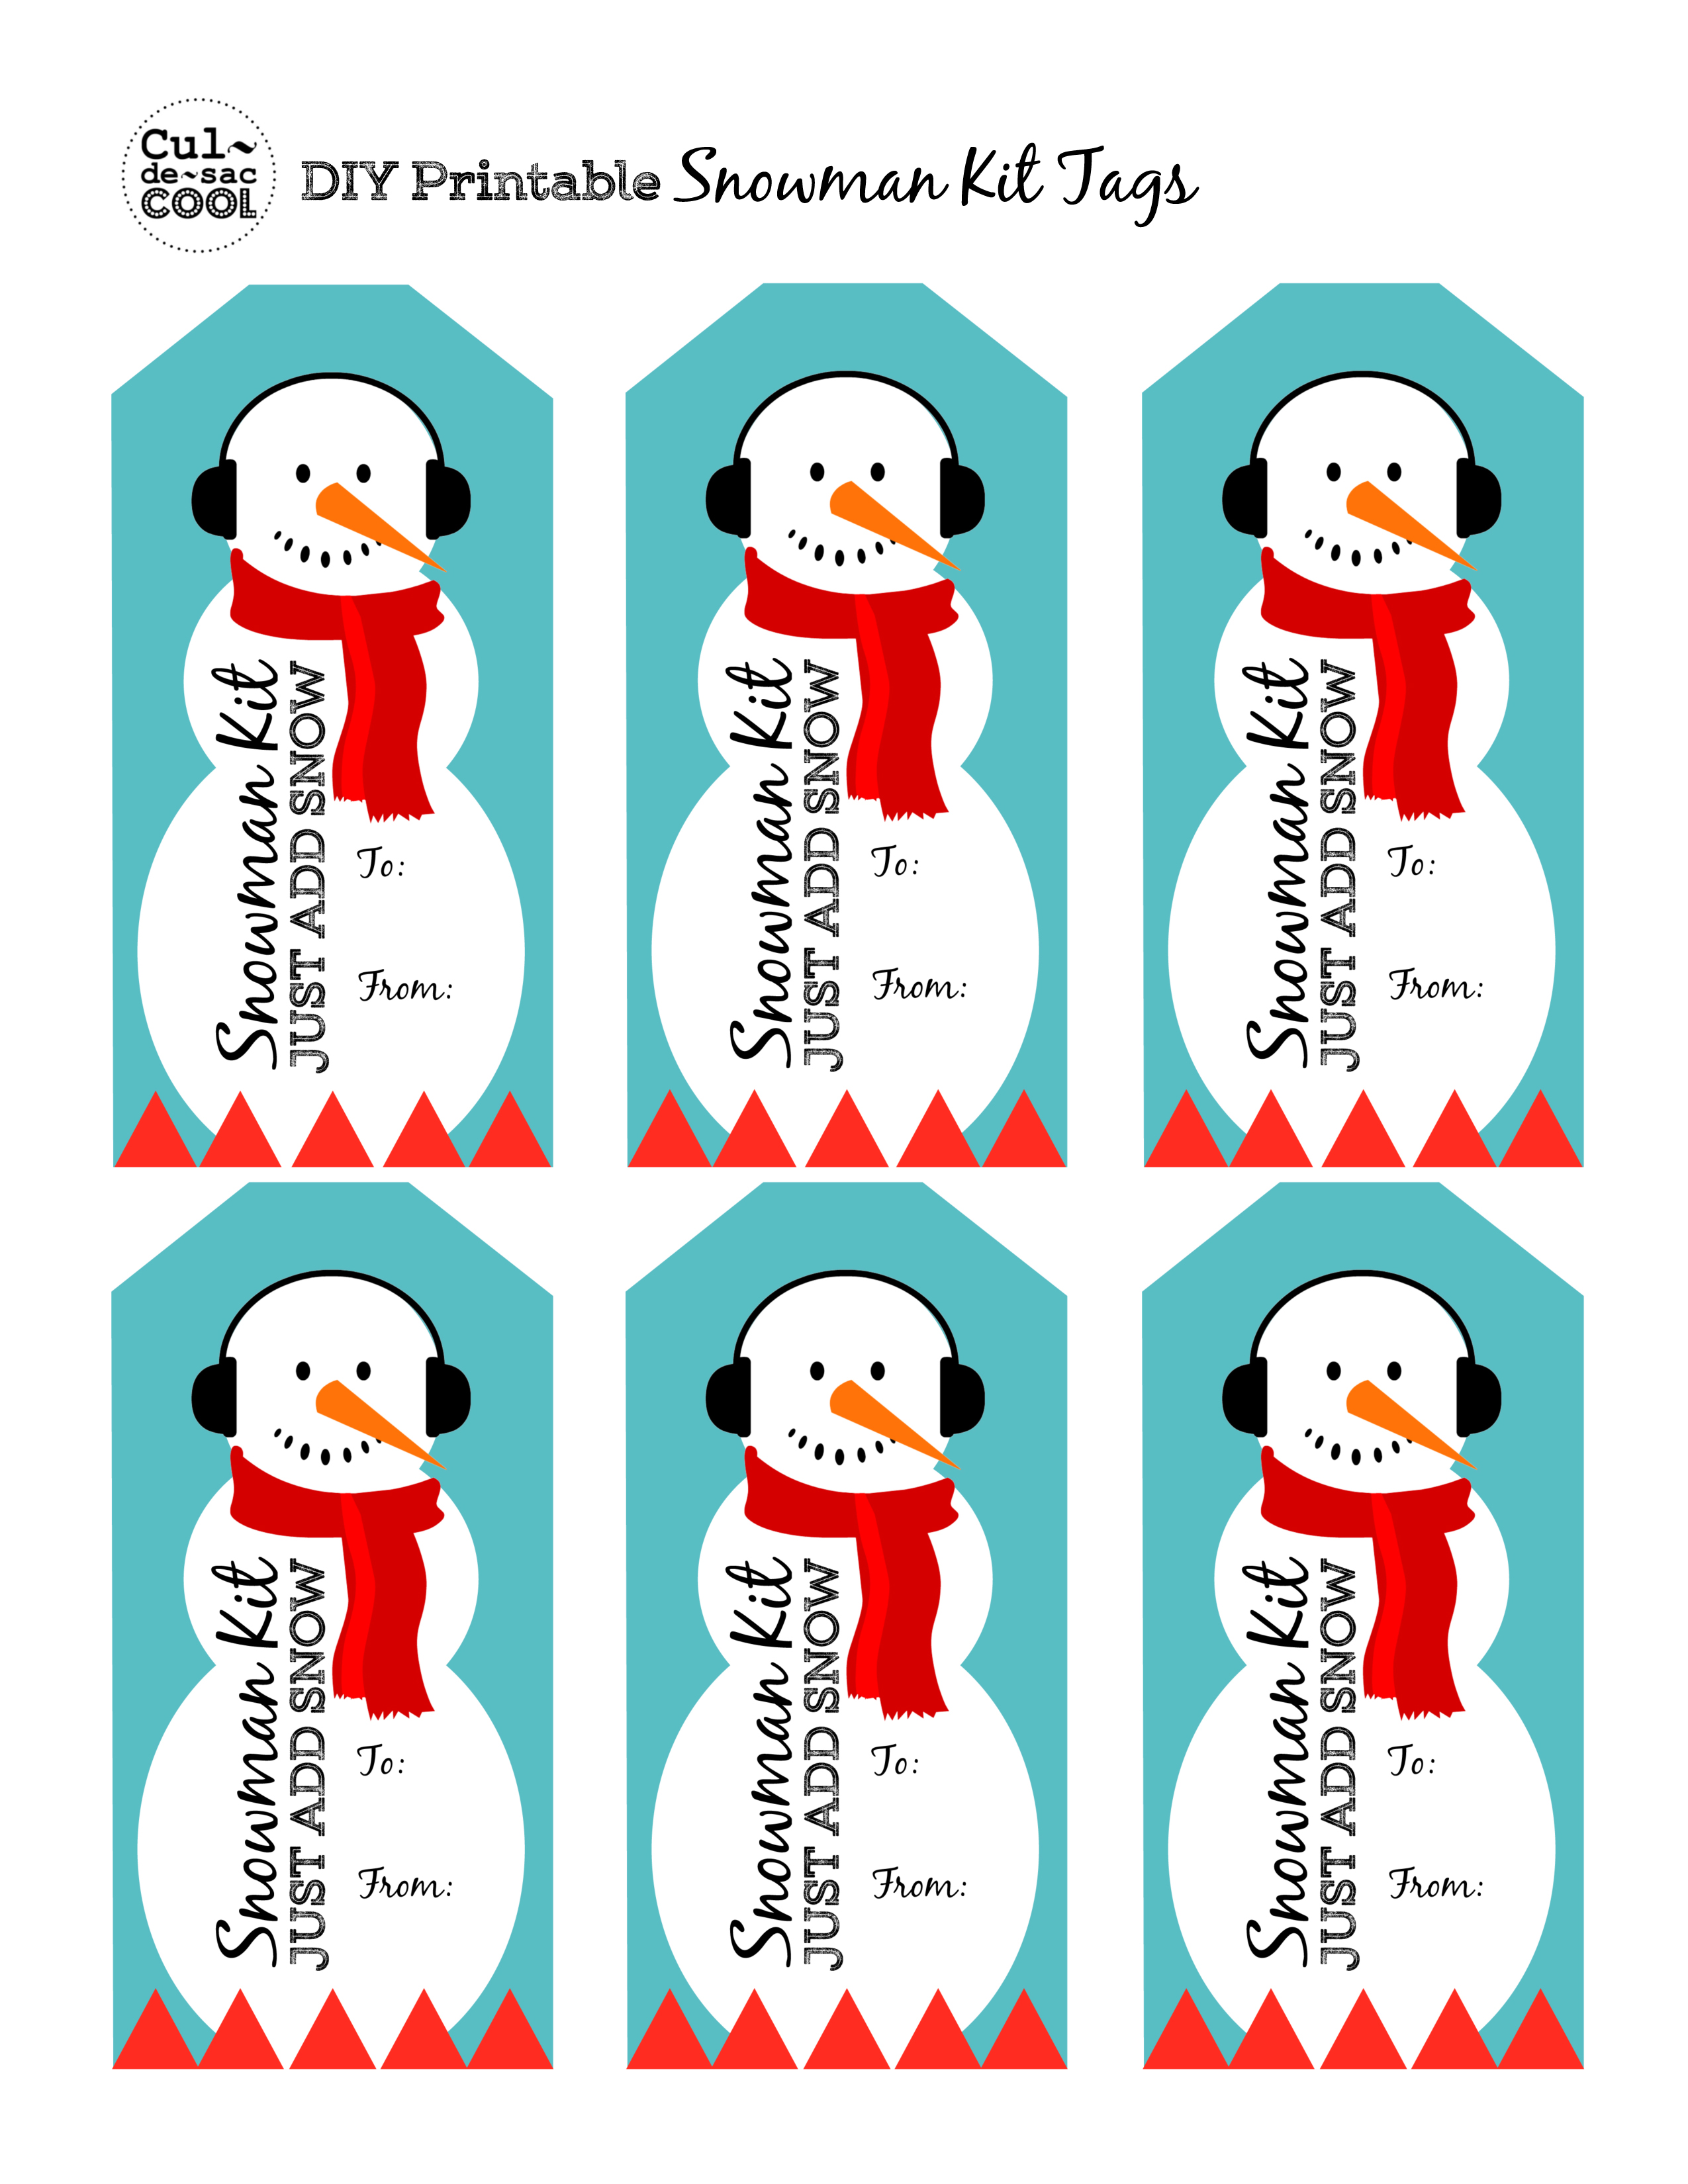 diy-snowman-kit-in-a-jar-with-free-printable-tag-great-neighbor-gift-teacher-gift-stocking